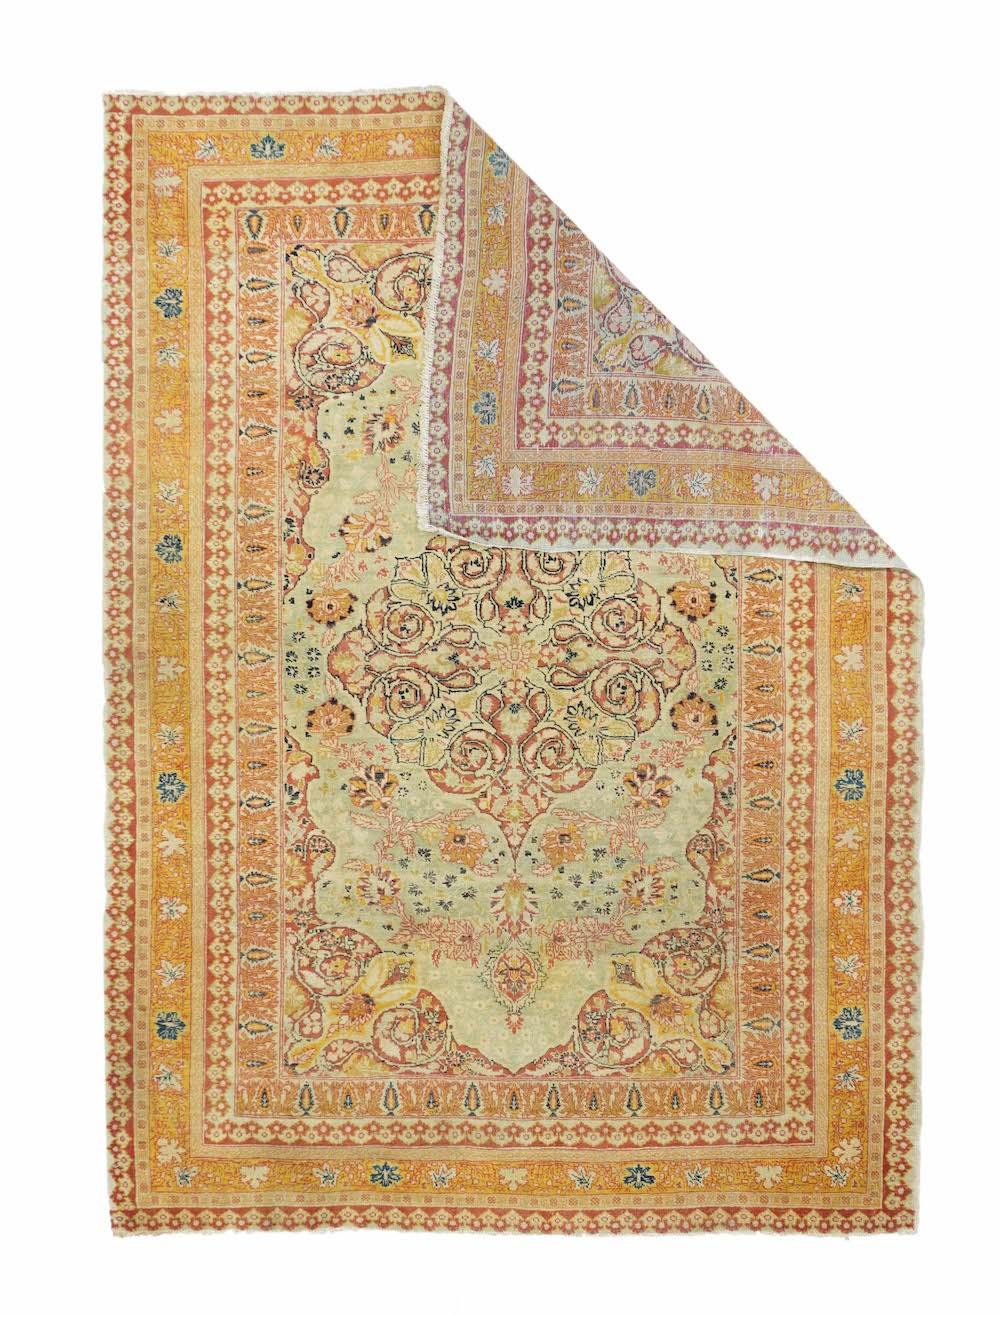 This antique scatter from an esteemed NW Persian city shows a straw field centred by a coral-rust volute medallion. Fan palmette vinery runs conformably along the medallion’s sides. Coral –rust corners. Cypress-pattern inner frame and goldenrod main